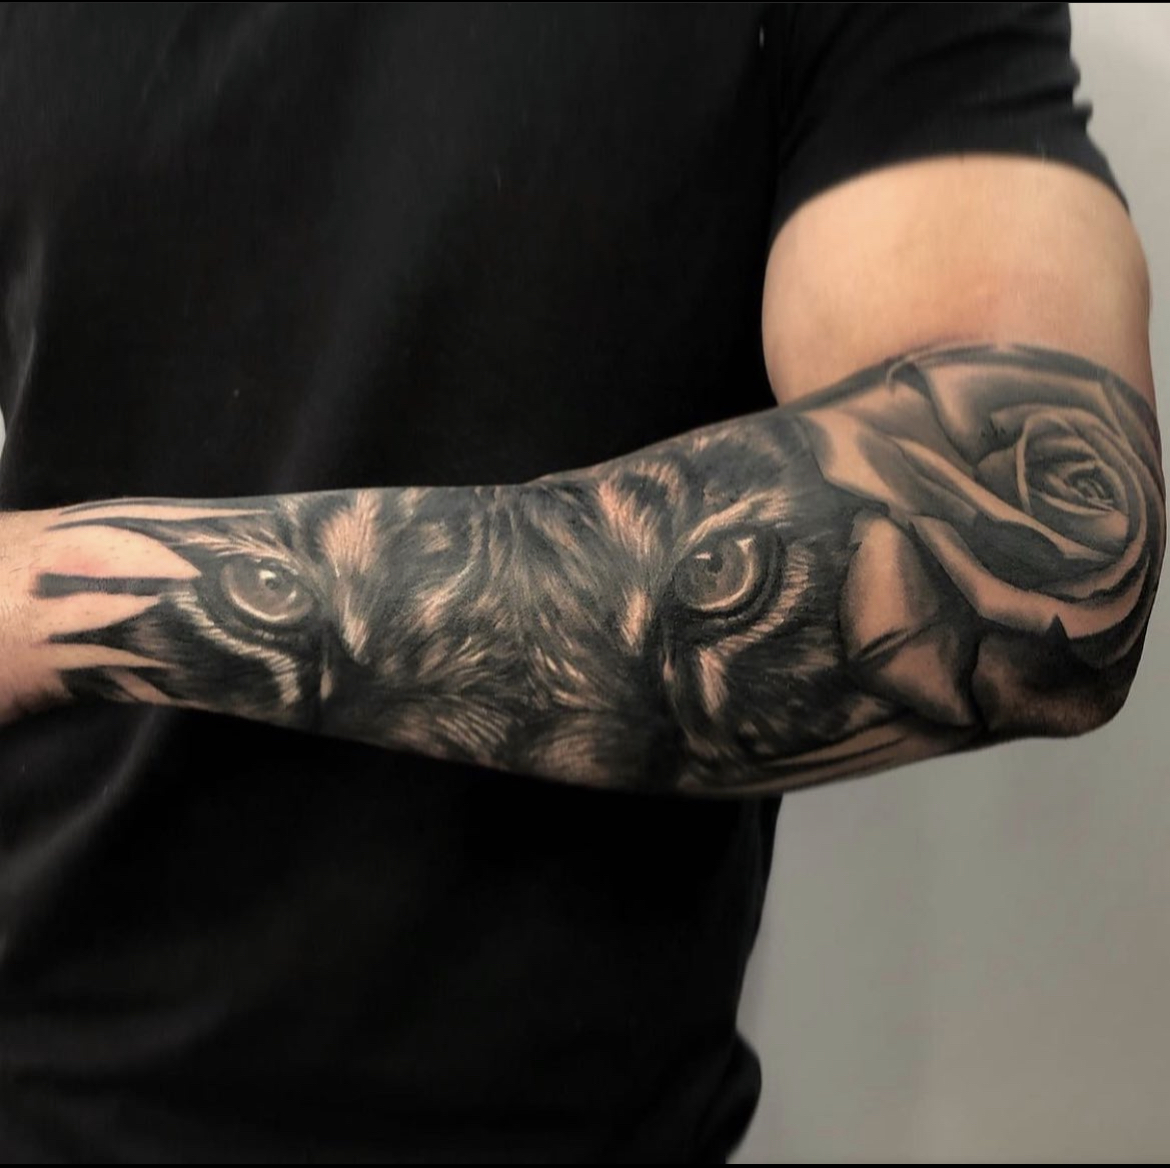 60 Unforgettable Biomechanical Tattoos that Creatively Combine Science and  Art - Designs, Meanings and Ideas | Biomechanical tattoo, Biomechanical tattoo  arm, Mechanical arm tattoo